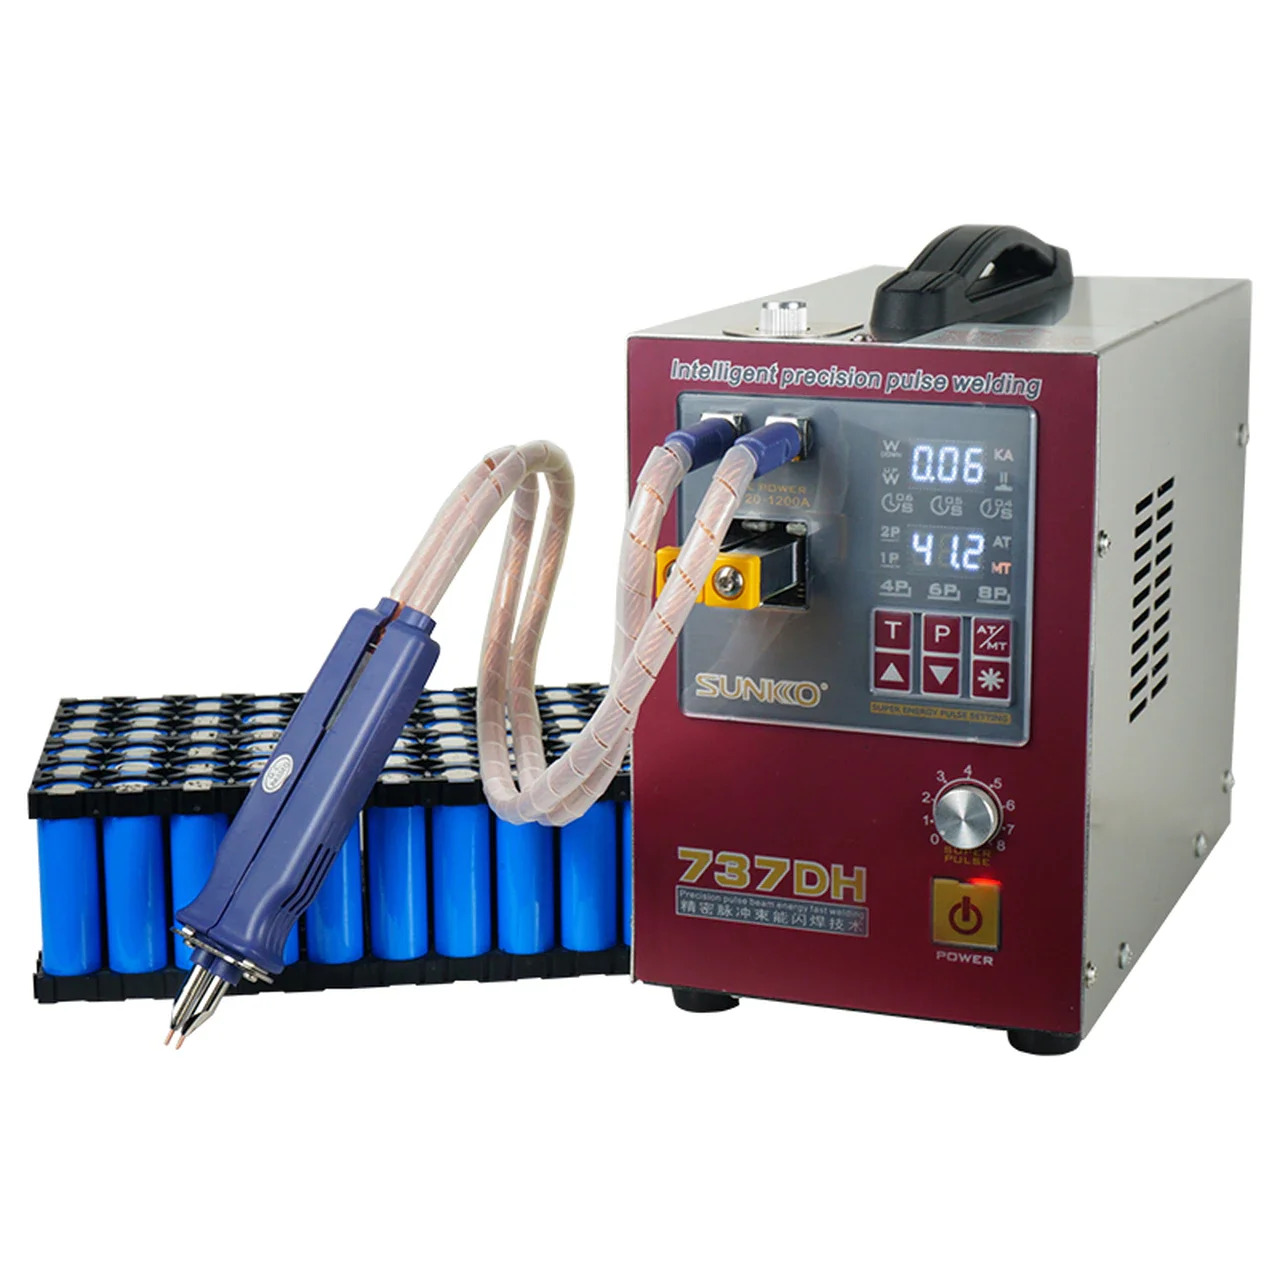 Battery Automatic Spot Welder 737DH Pulse Spot Welding Machine Lead Acid Battery Charger with High Quality